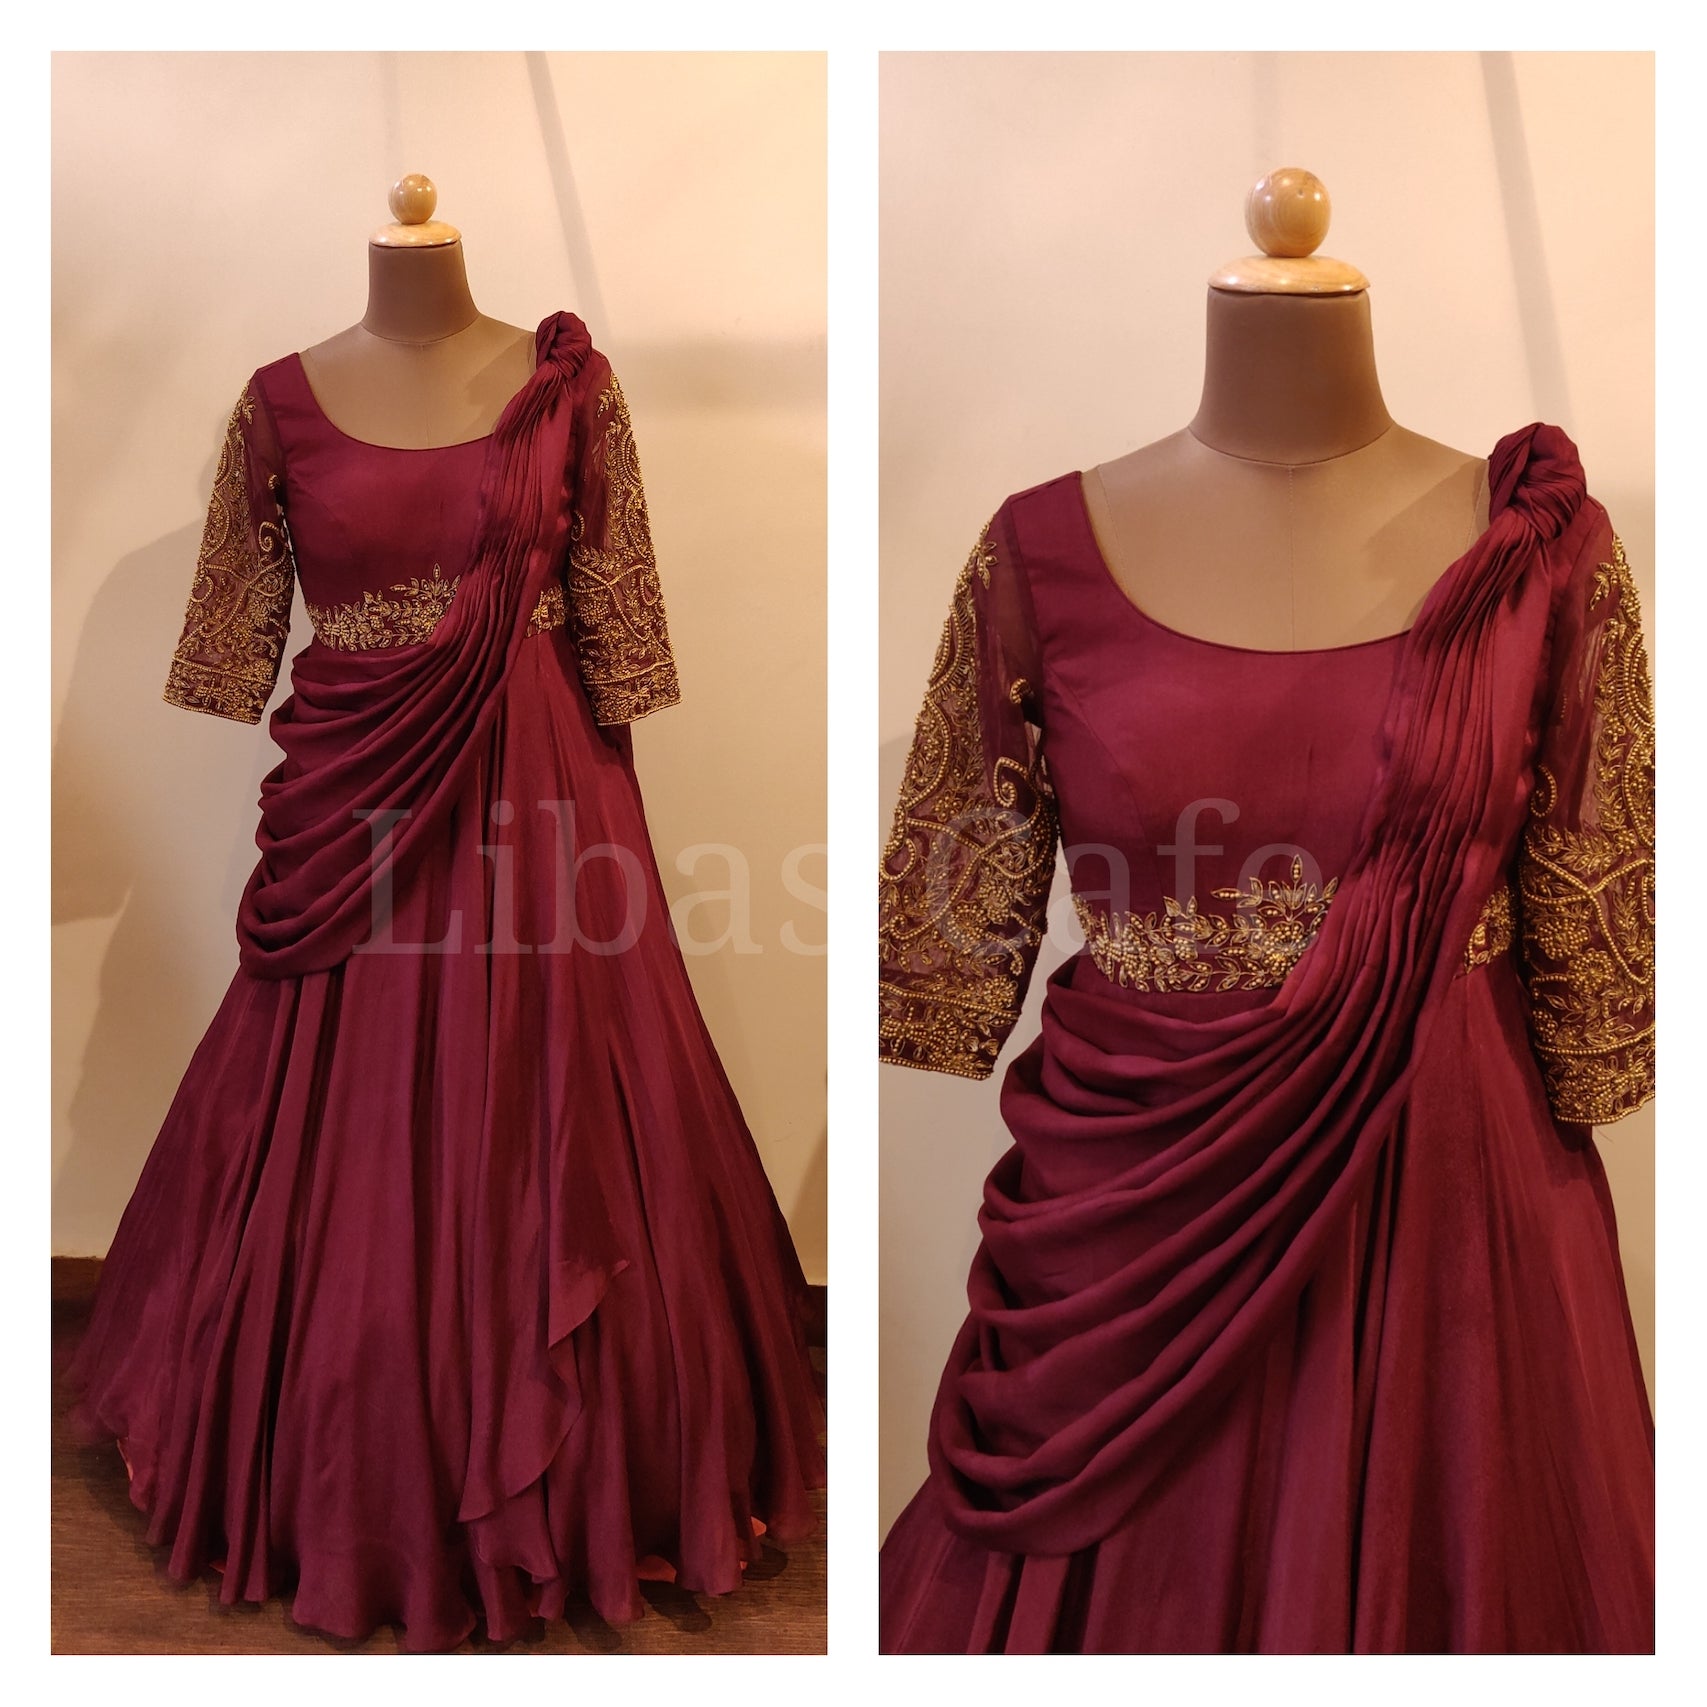 Wine Drape Gown With Metallic Embroidery